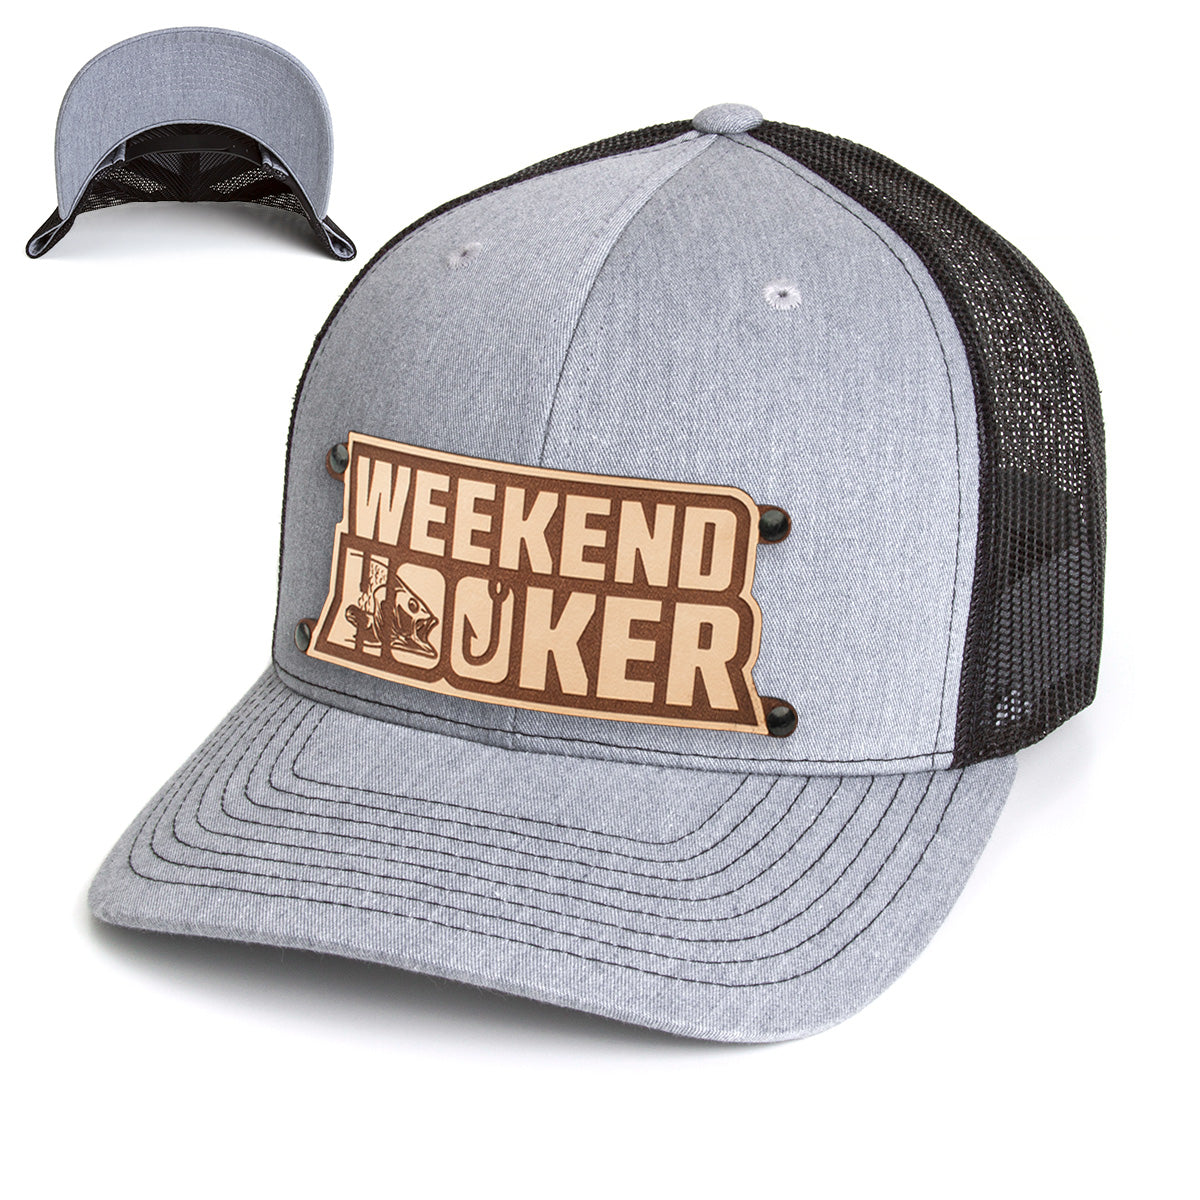 Weekend Hooker Fishing Hat - Breathable and Stylish Trucker Hat Gray & Blk Mesh TR